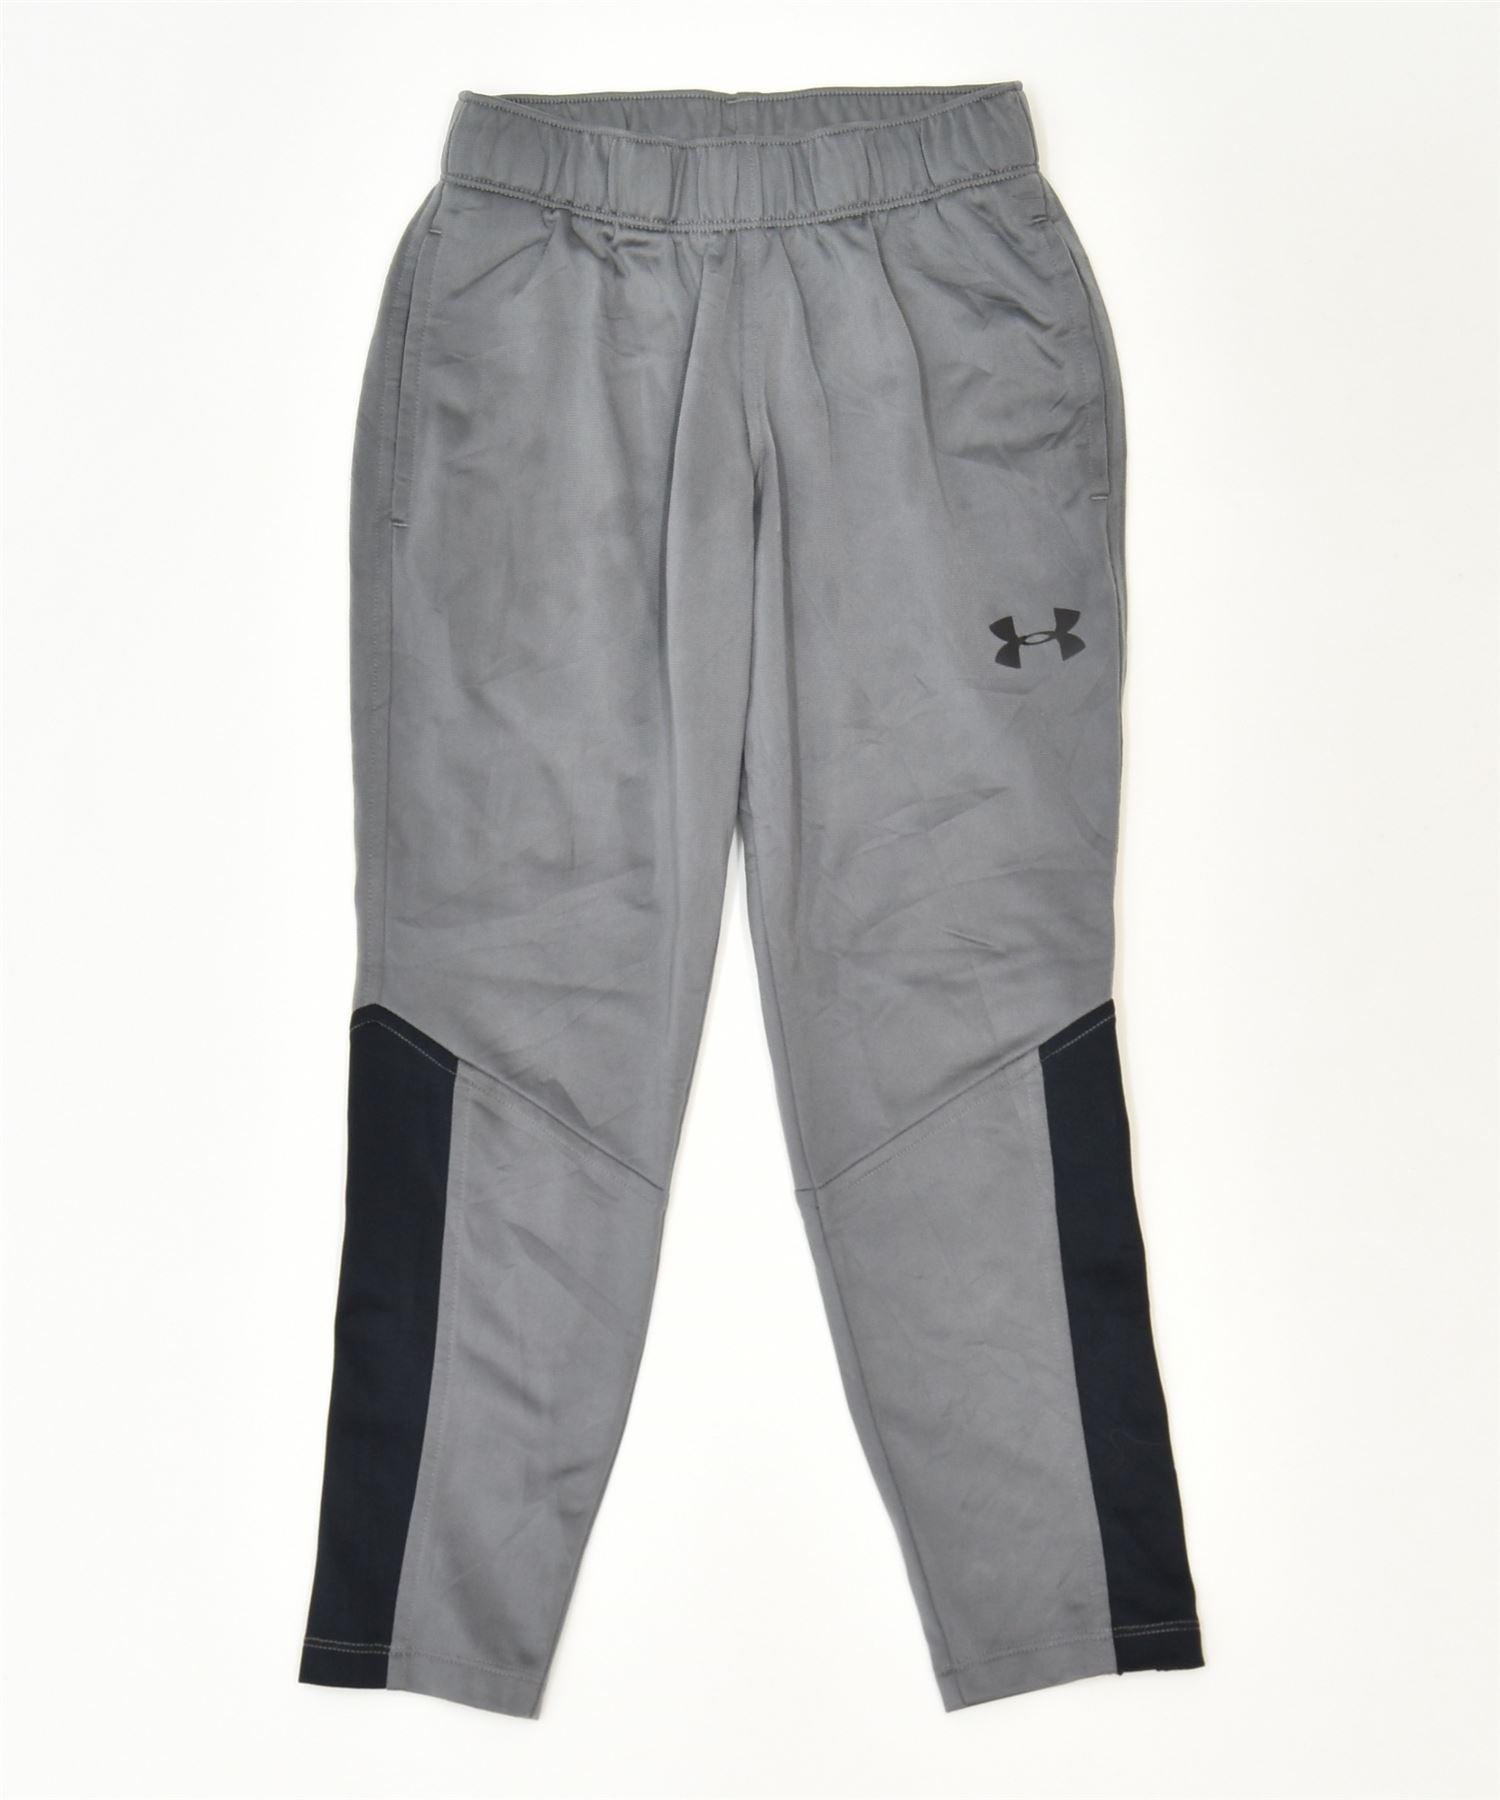 UNDER ARMOUR Girls Tracksuit Trousers 6-7 Years XS Grey Polyester Sports, Vintage & Second-Hand Clothing Online